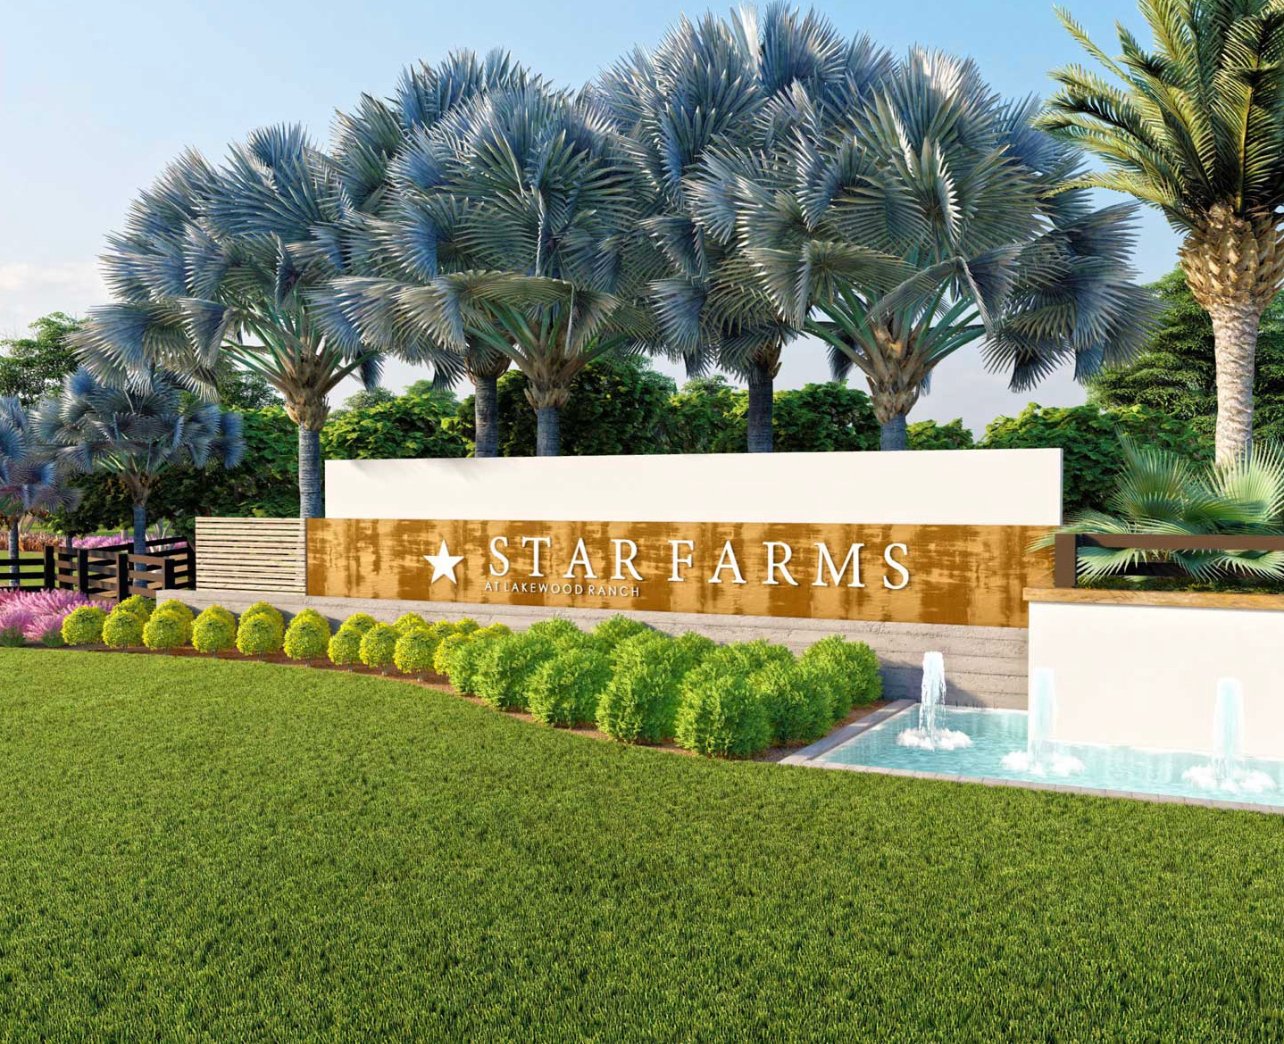 Star Farms is a beautiful, gated neighborhood in Sarasota. The homes are luxurious and feature top-of-the-line amenities. If you're looking for a luxurious, private community to call home, Star Farms is the perfect place for you.